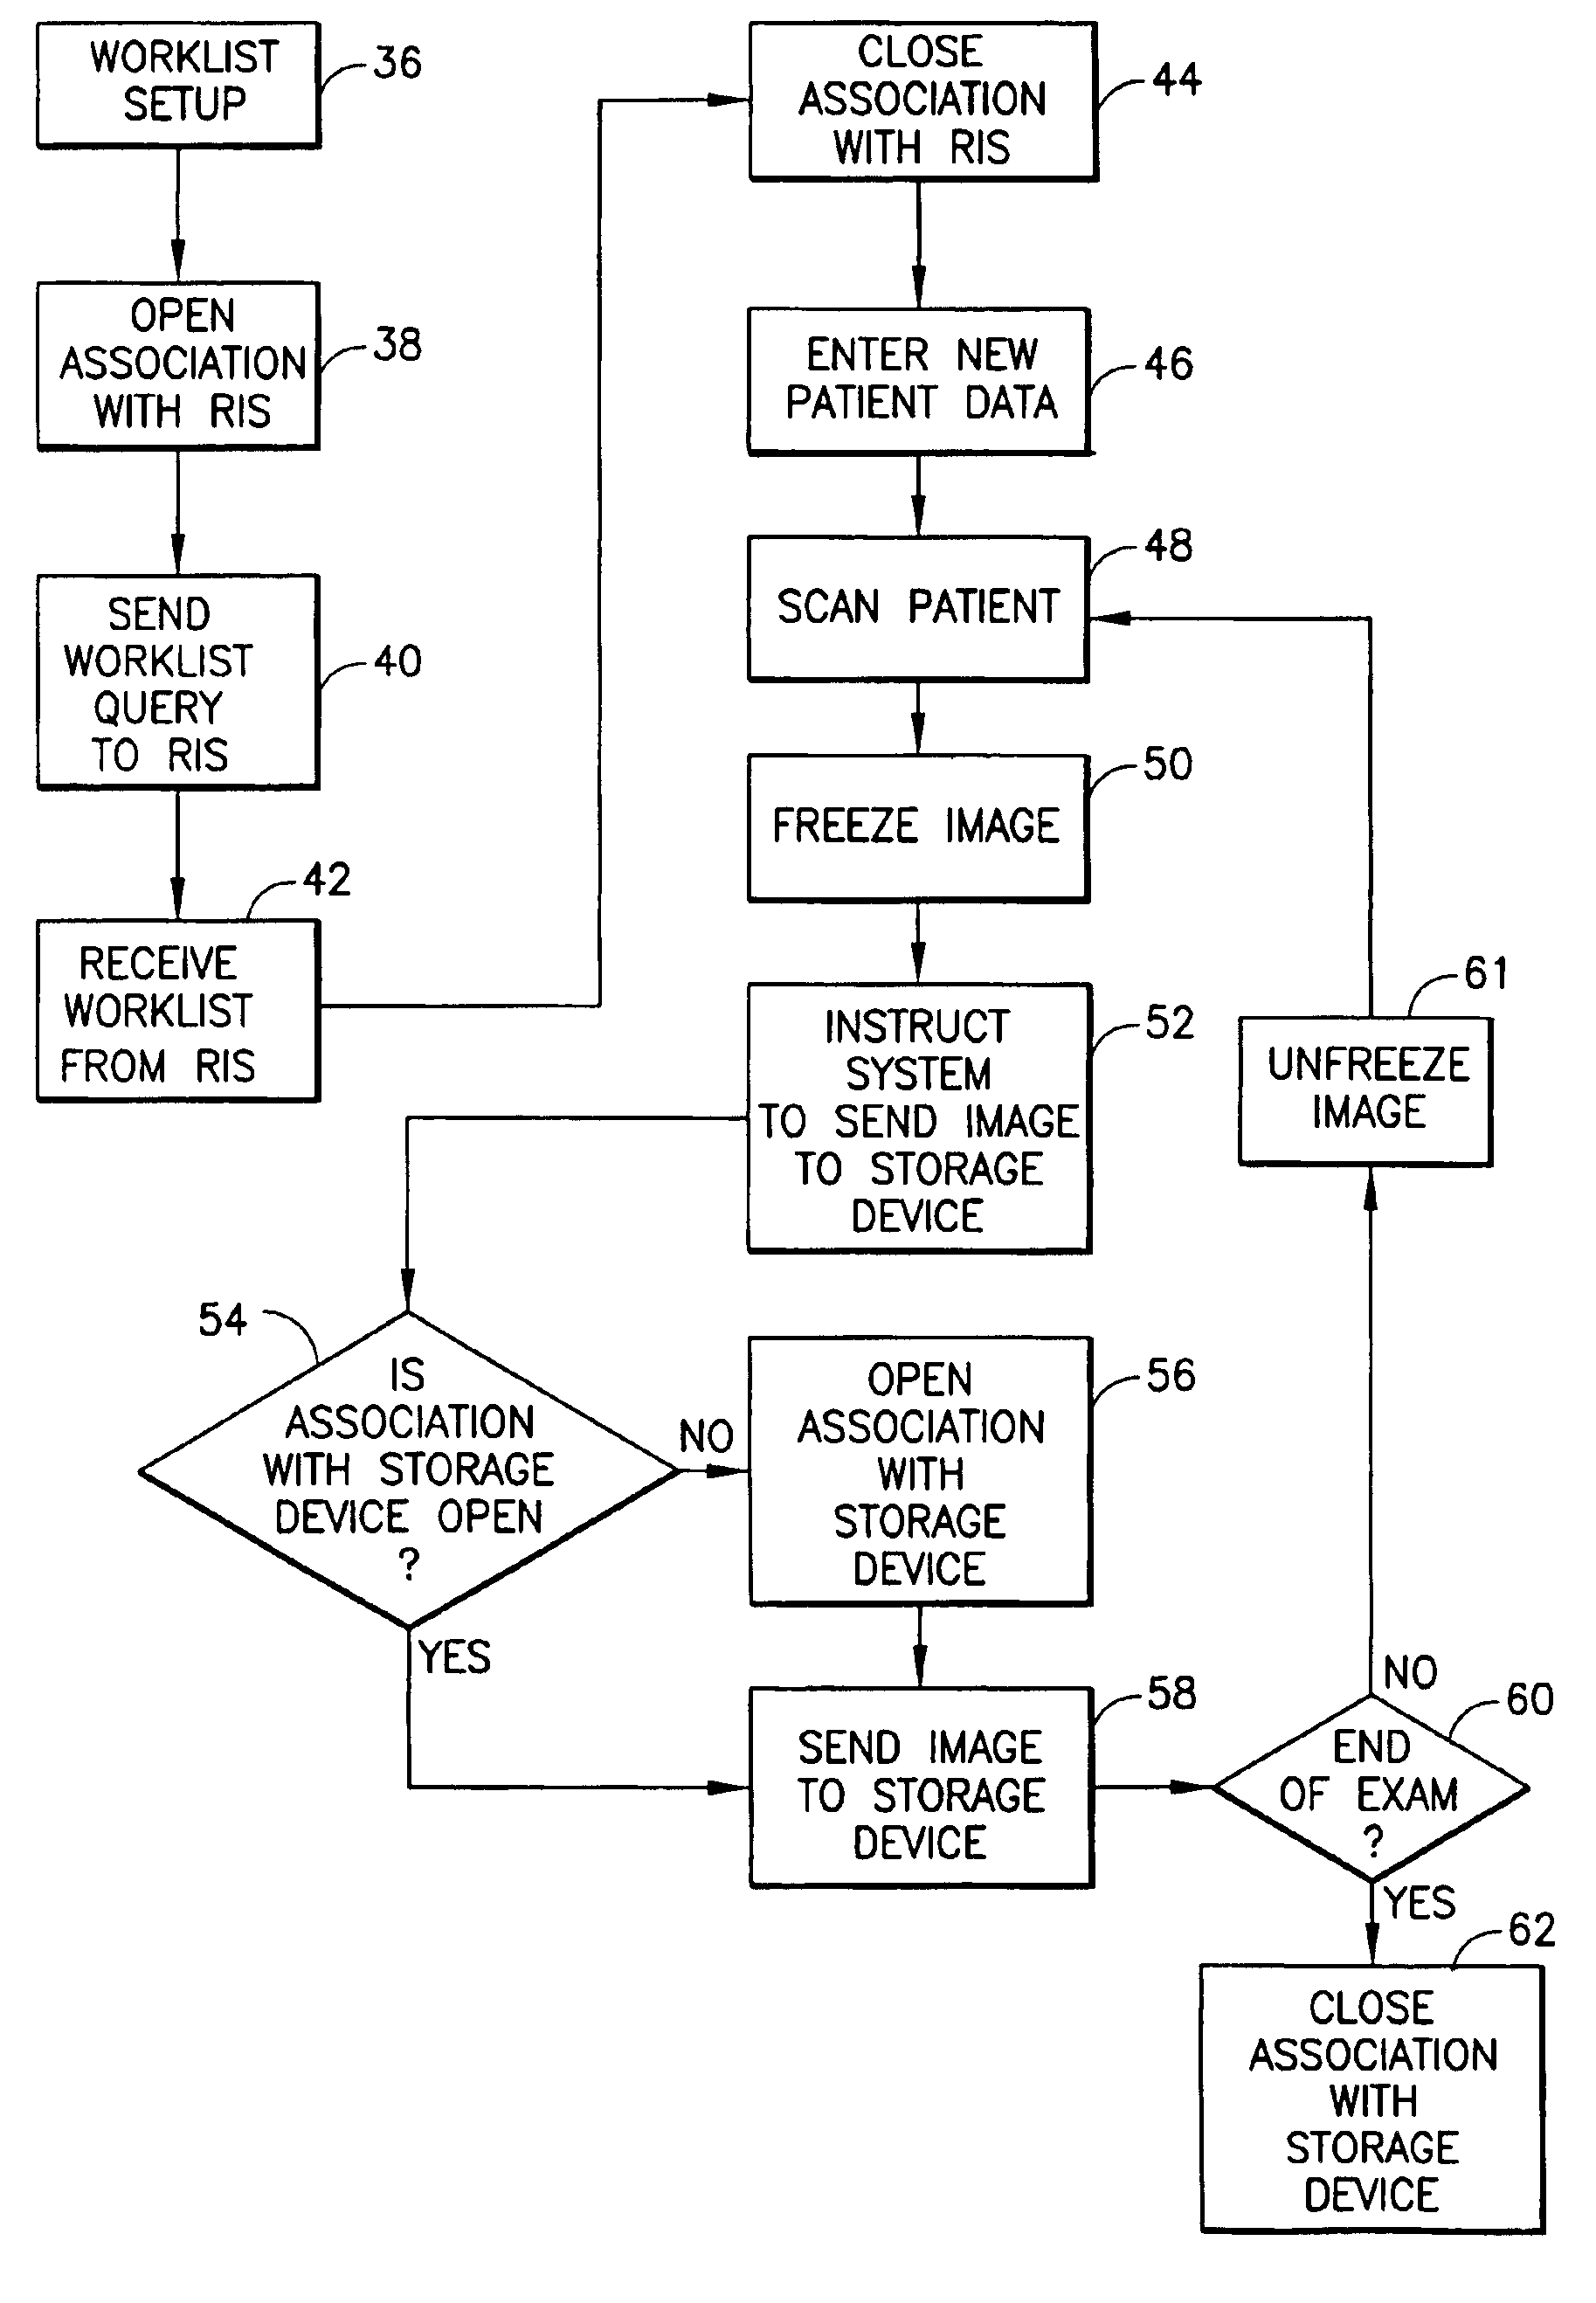 Method and apparatus for requesting and displaying worklist data from remotely located device